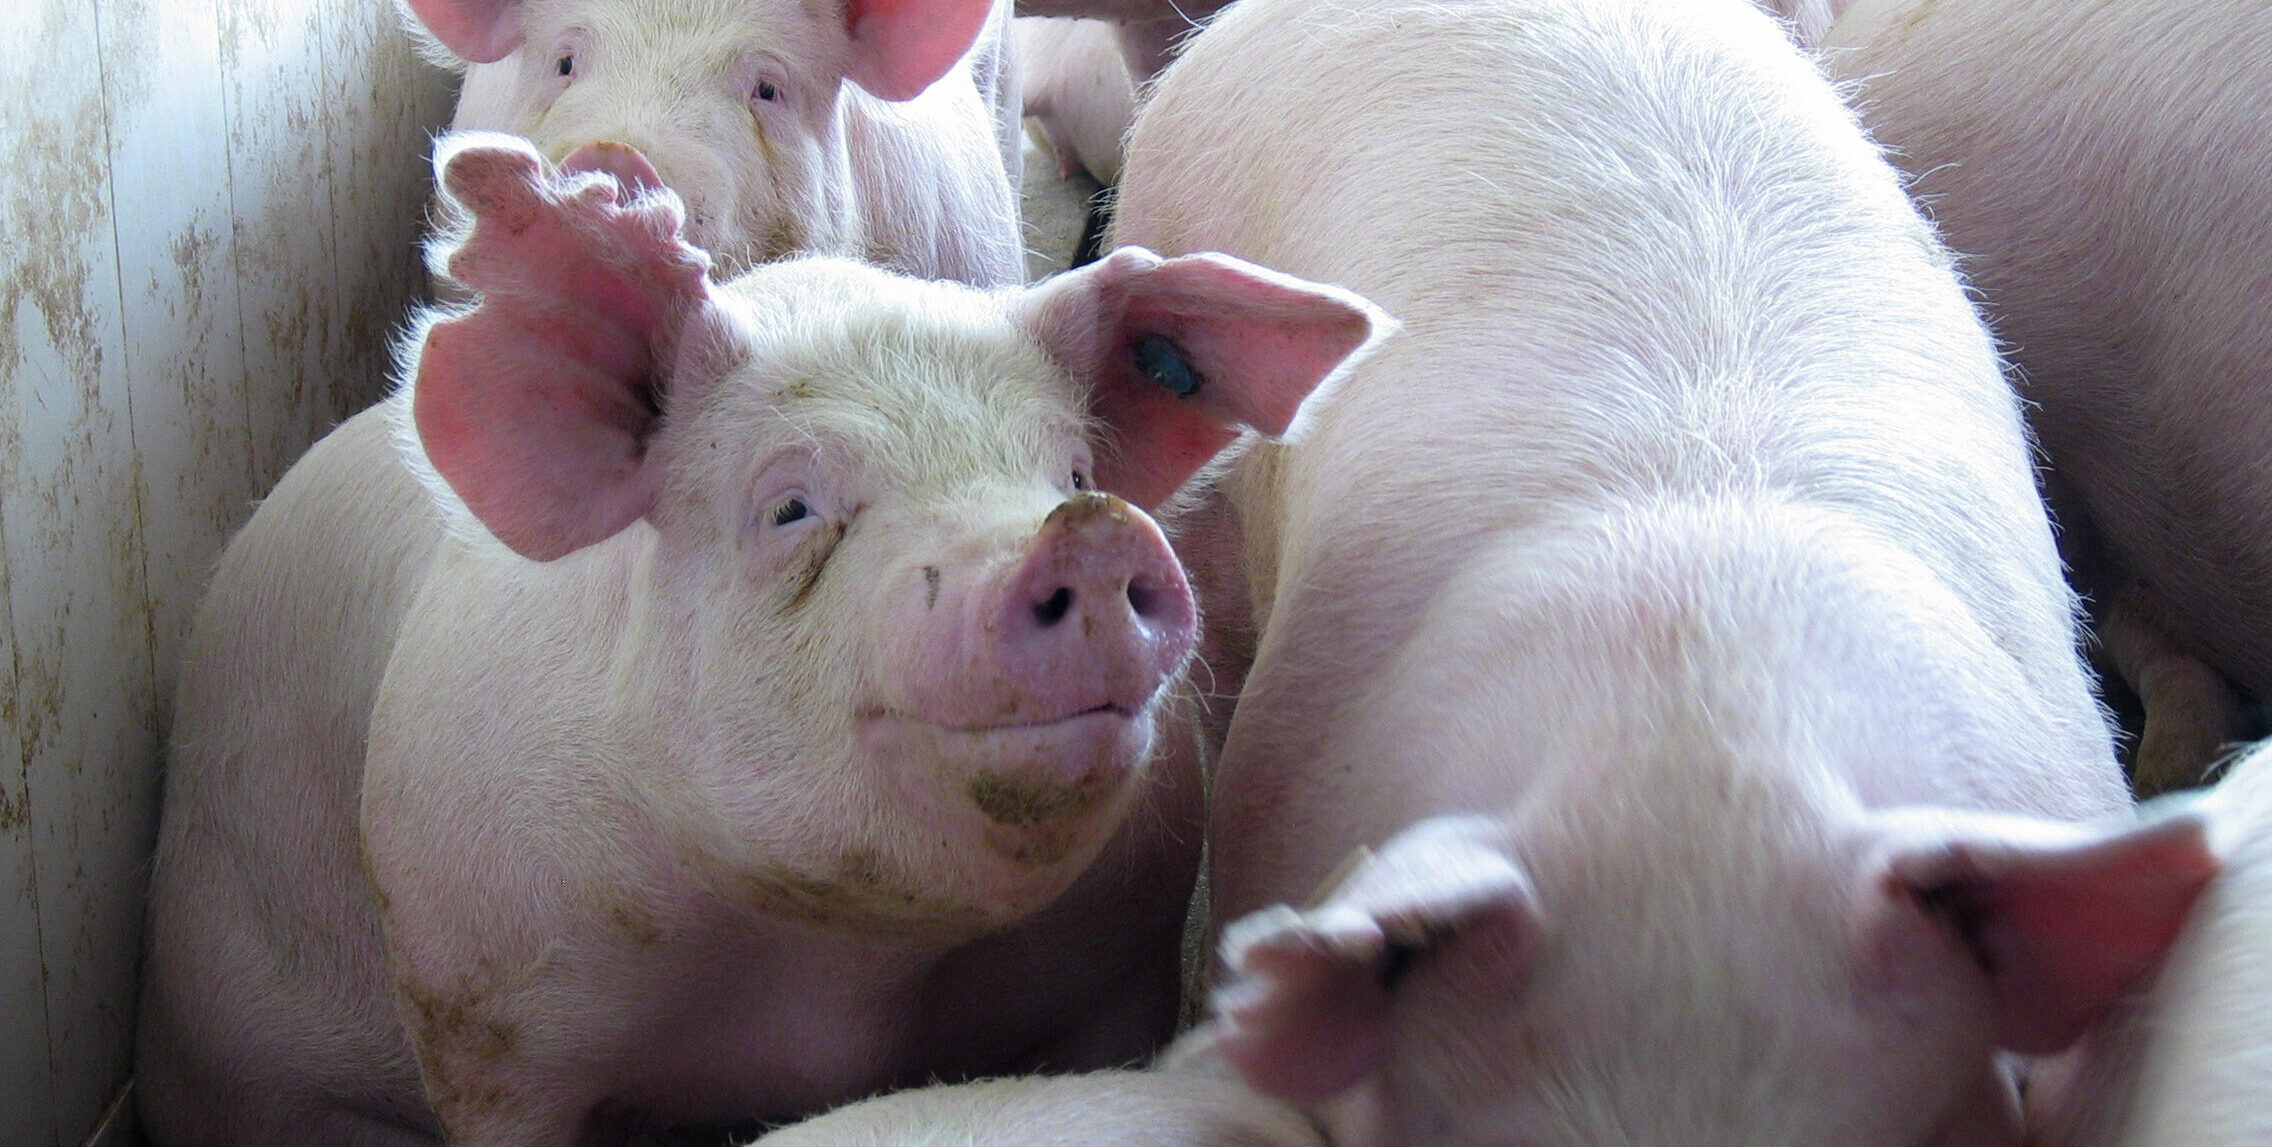 Several pigs with one looking at the camera. Photo links to Swine Production